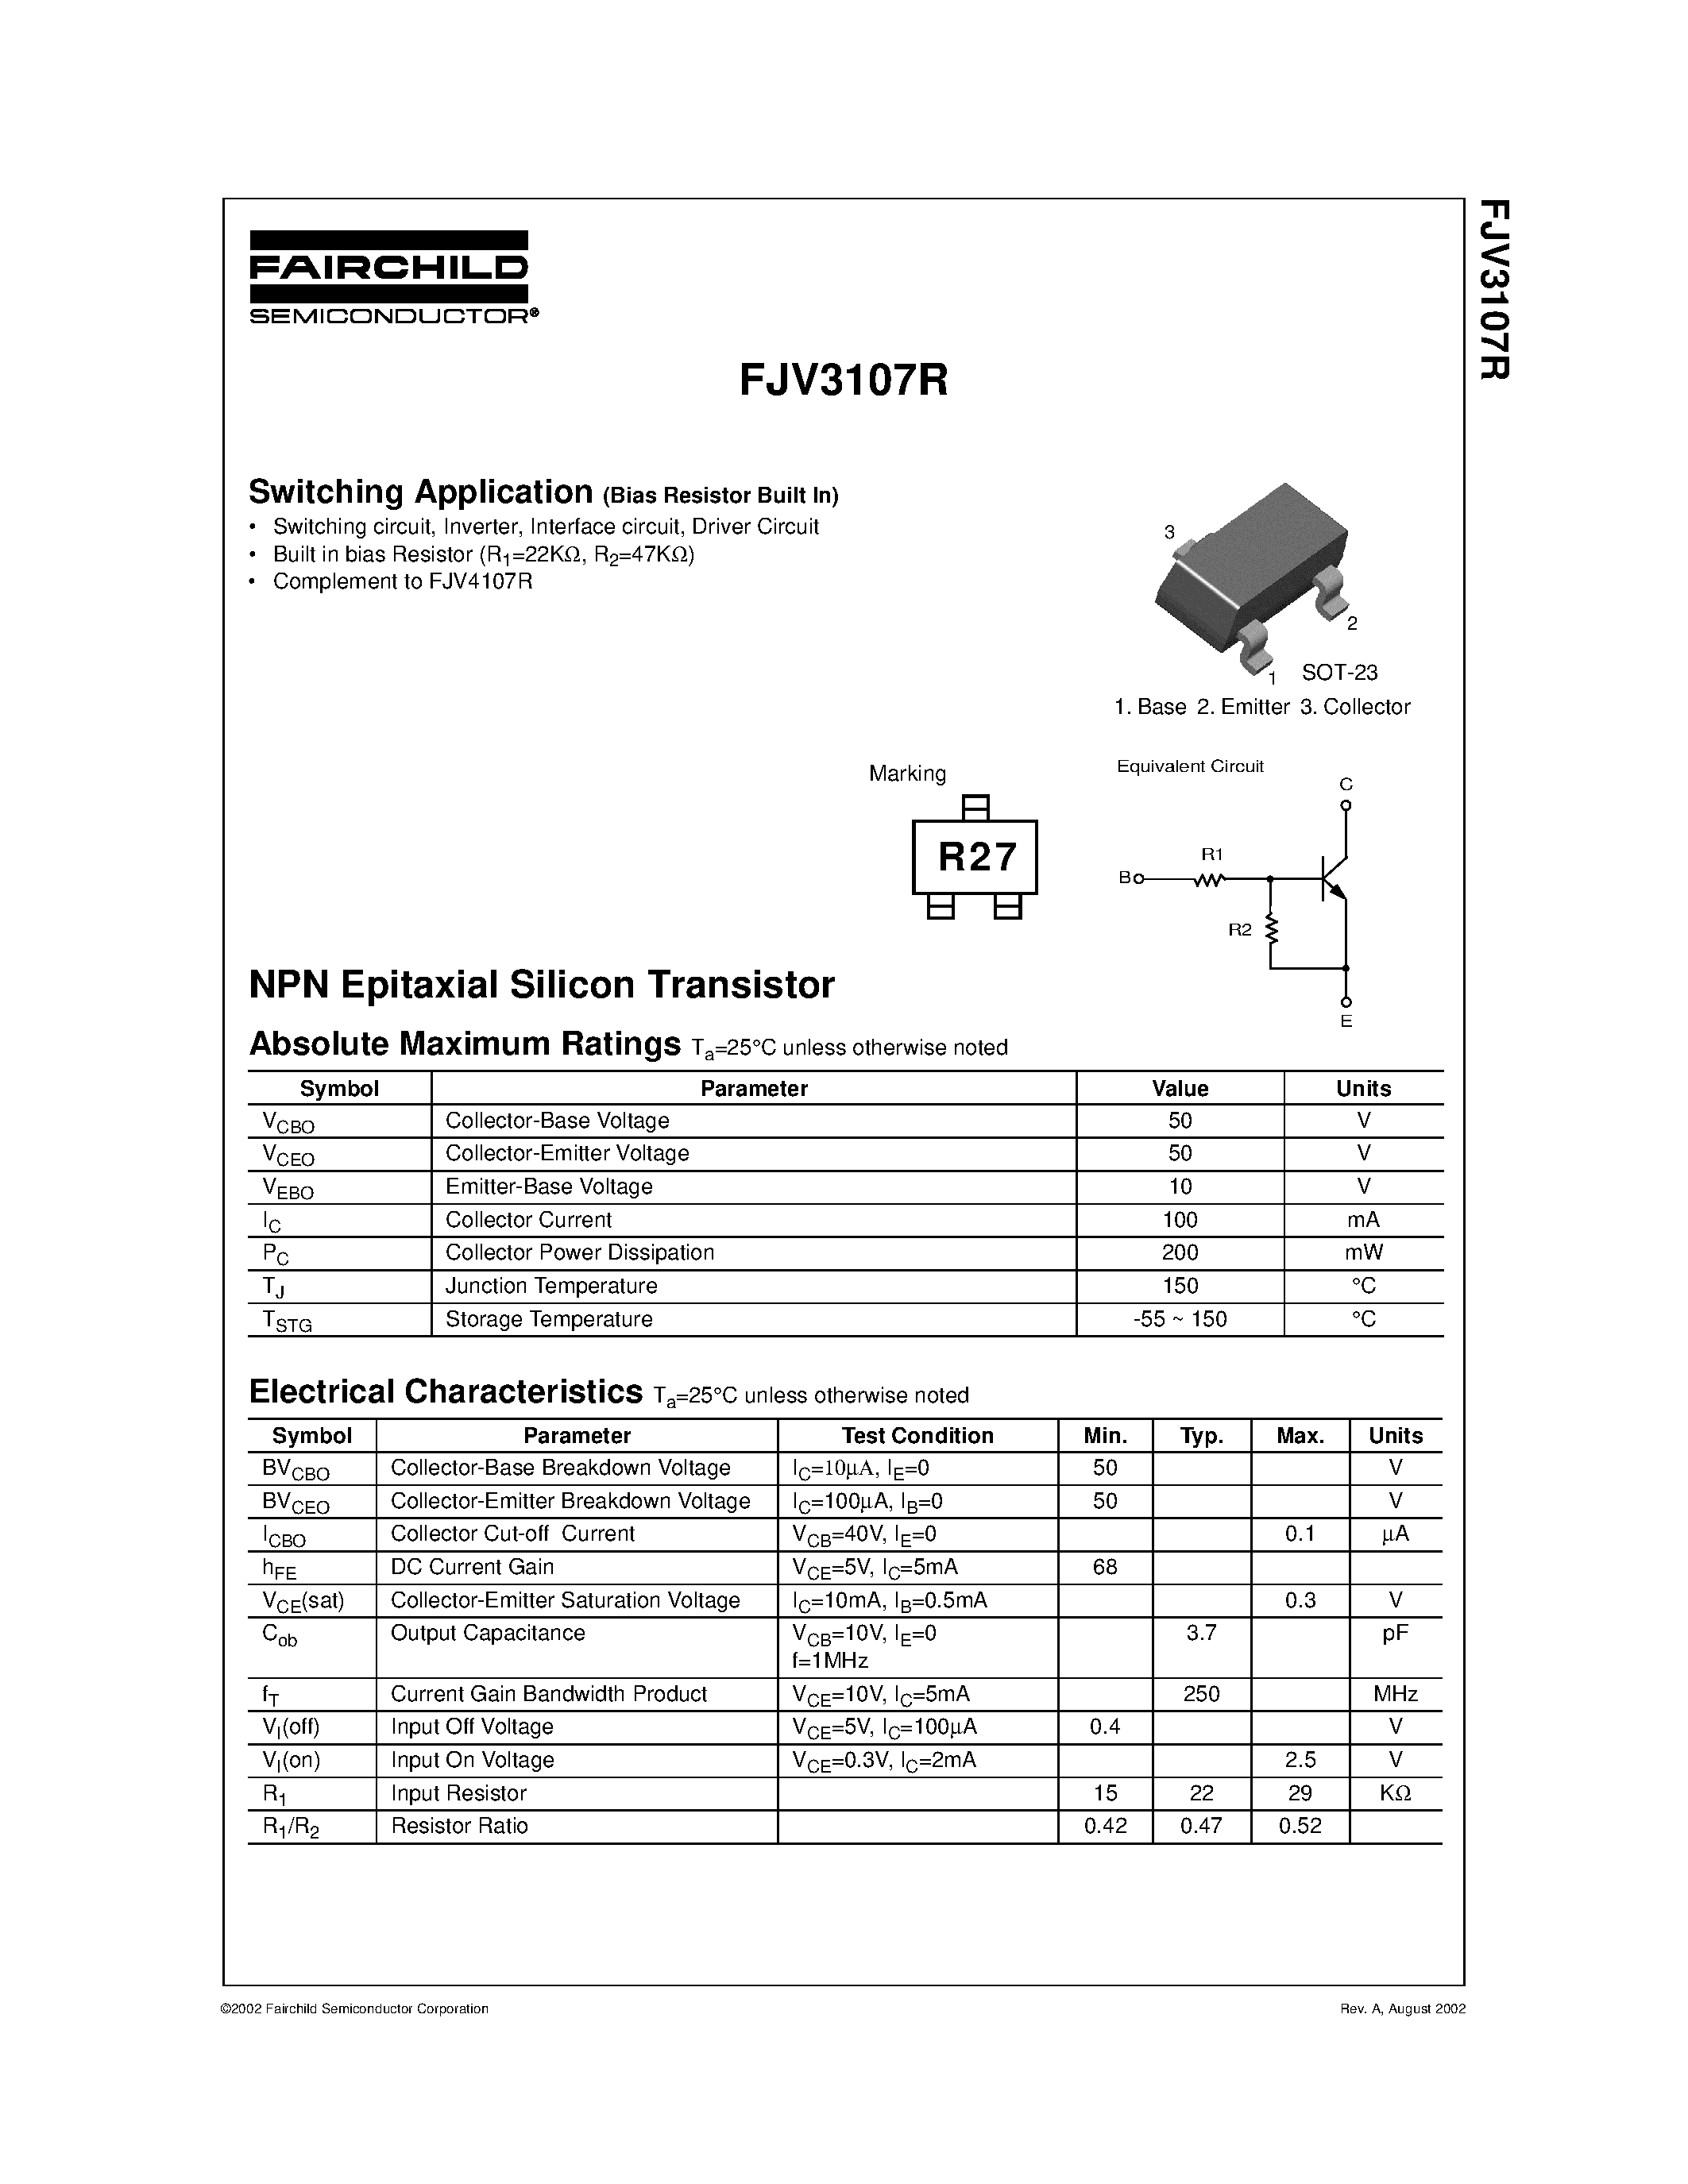 Datasheet FJV3107R - NPN Epitaxial Silicon Transistor page 1